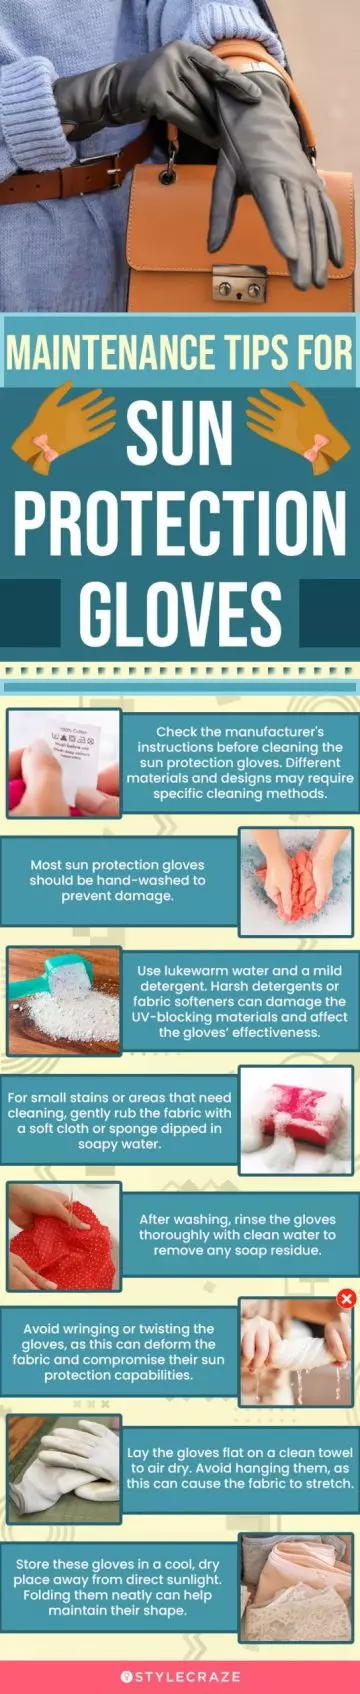 Maintenance Tips For Sun Protection Gloves(infographic)